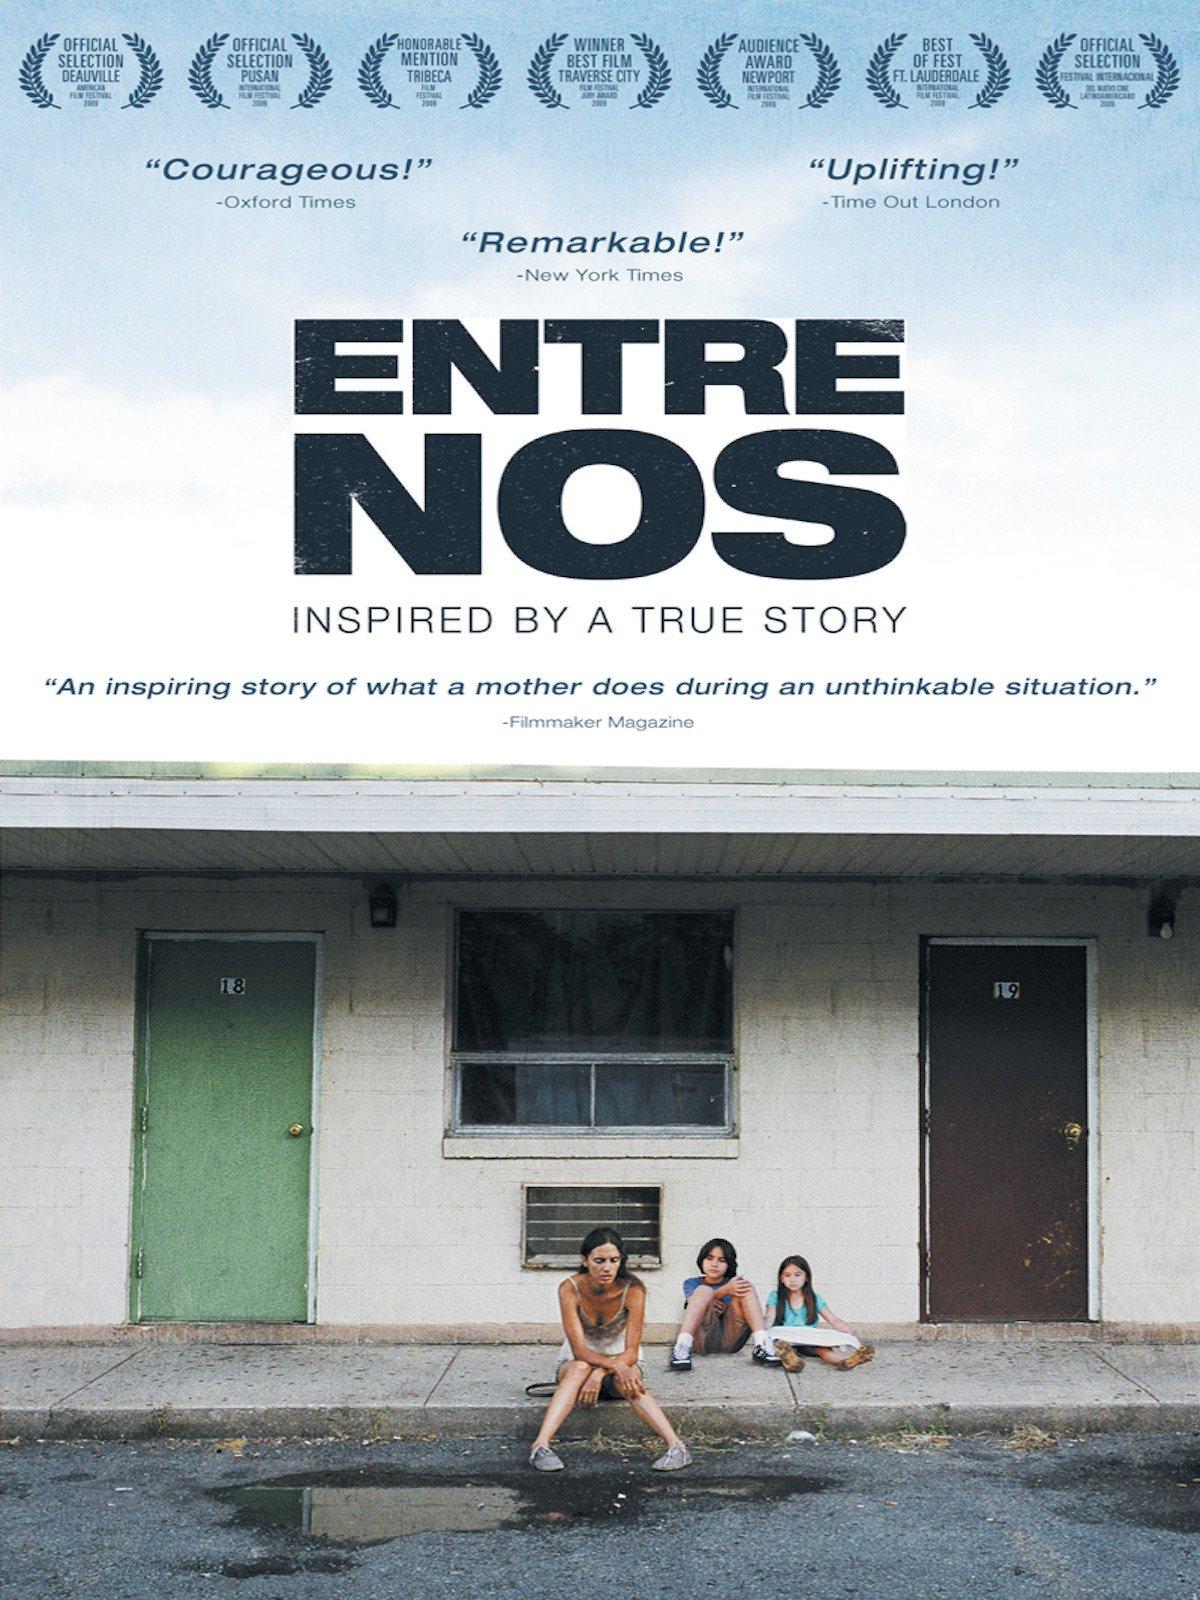 Image of Movie Poster. Woman sitting on a sidewalk curb in front of a motel building. A little boy and girl are sitting on the sidewalk behind her. 